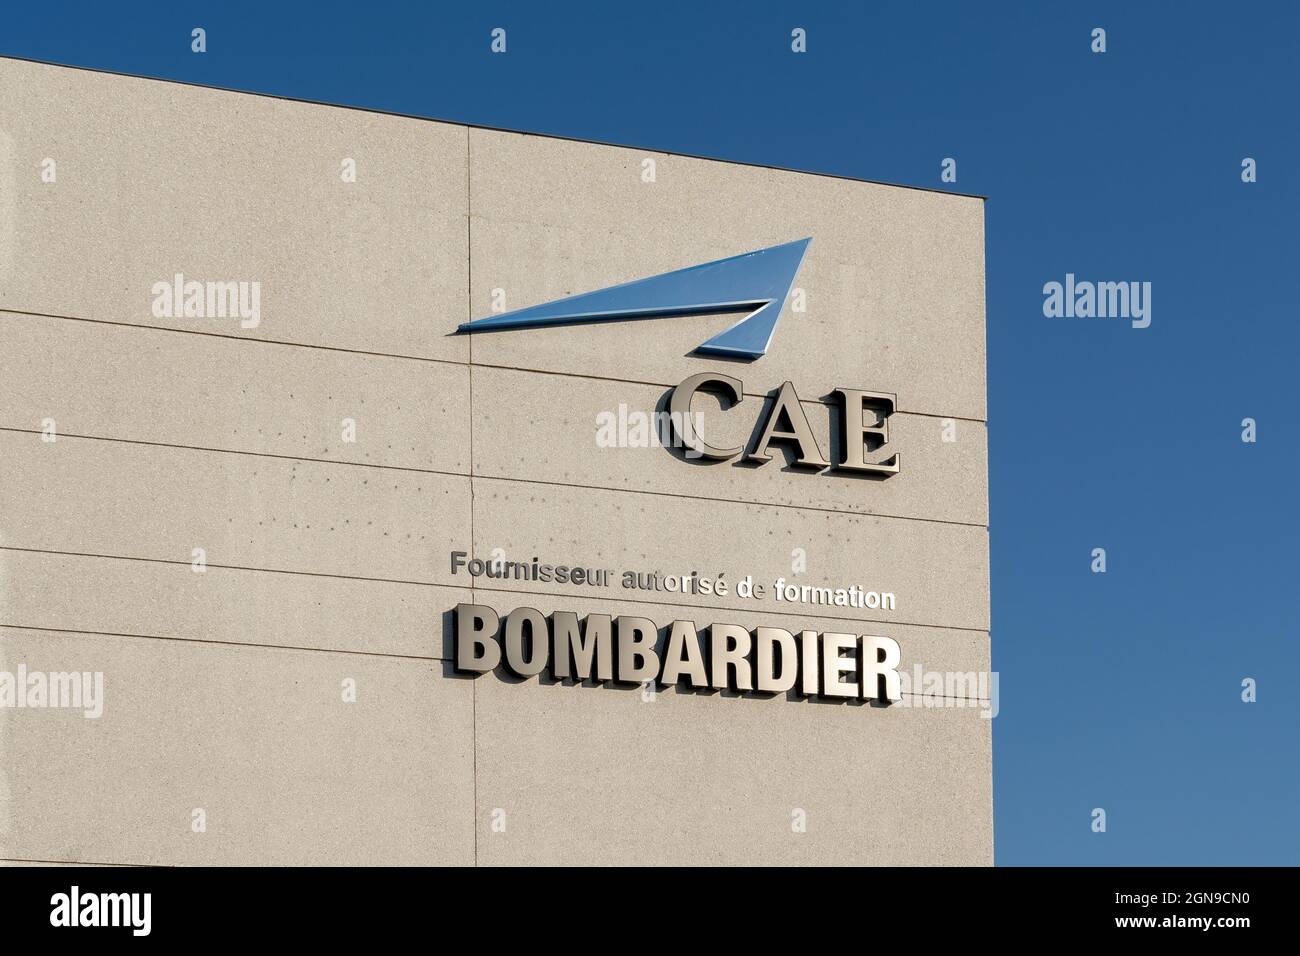 Montreal, QC, Canada - September 4, 2021: Close up of CAE sign at their headquarters in Montreal, QC, Canada. Stock Photo